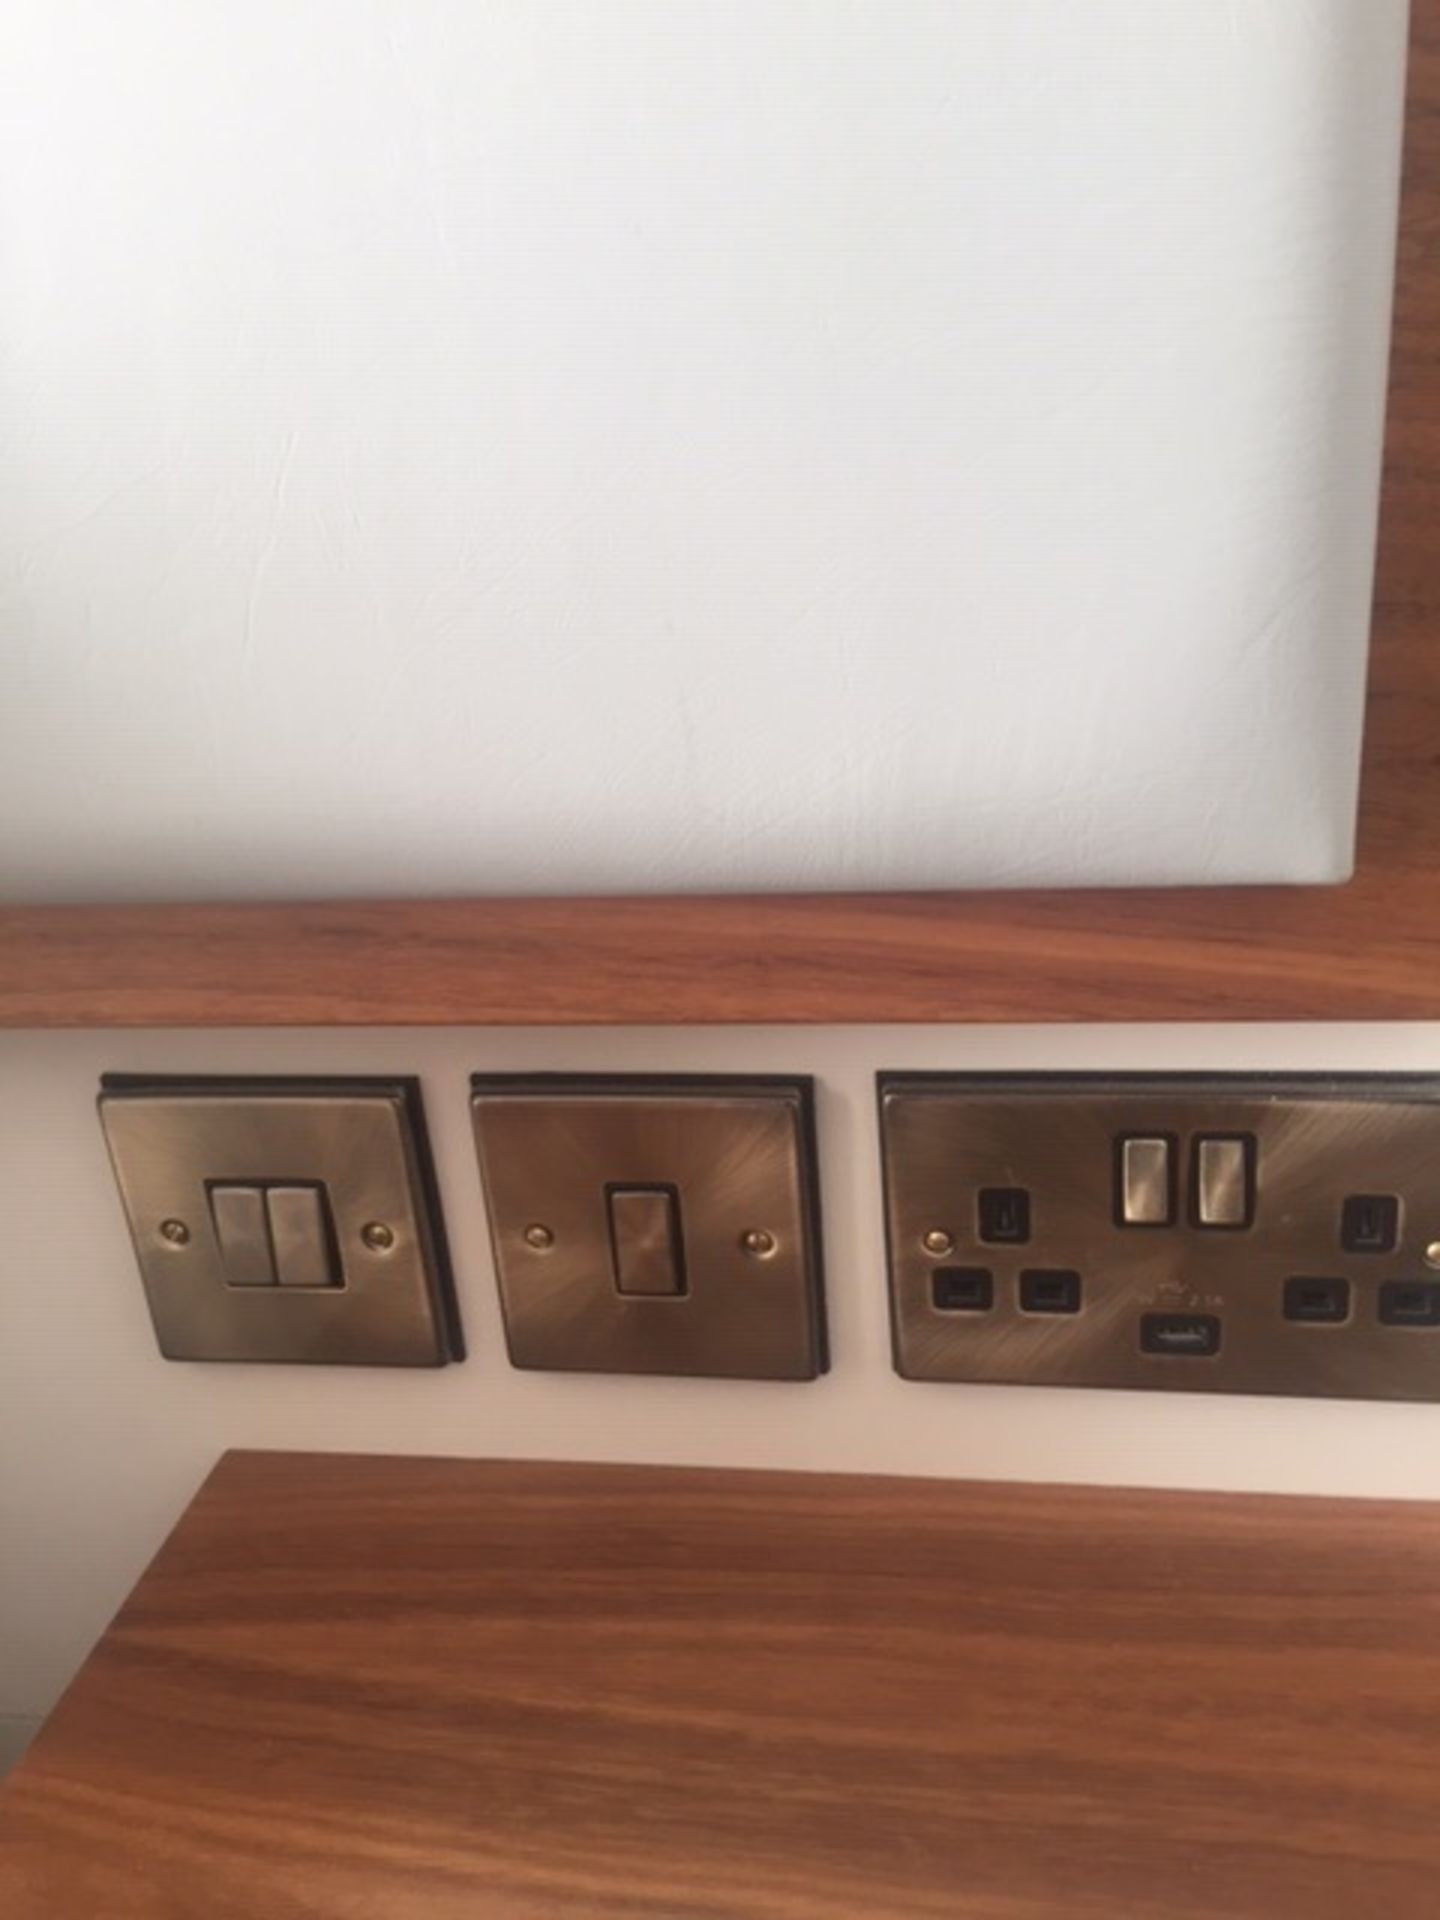 Wall panel with headboard, light fittings and switches - Image 3 of 4